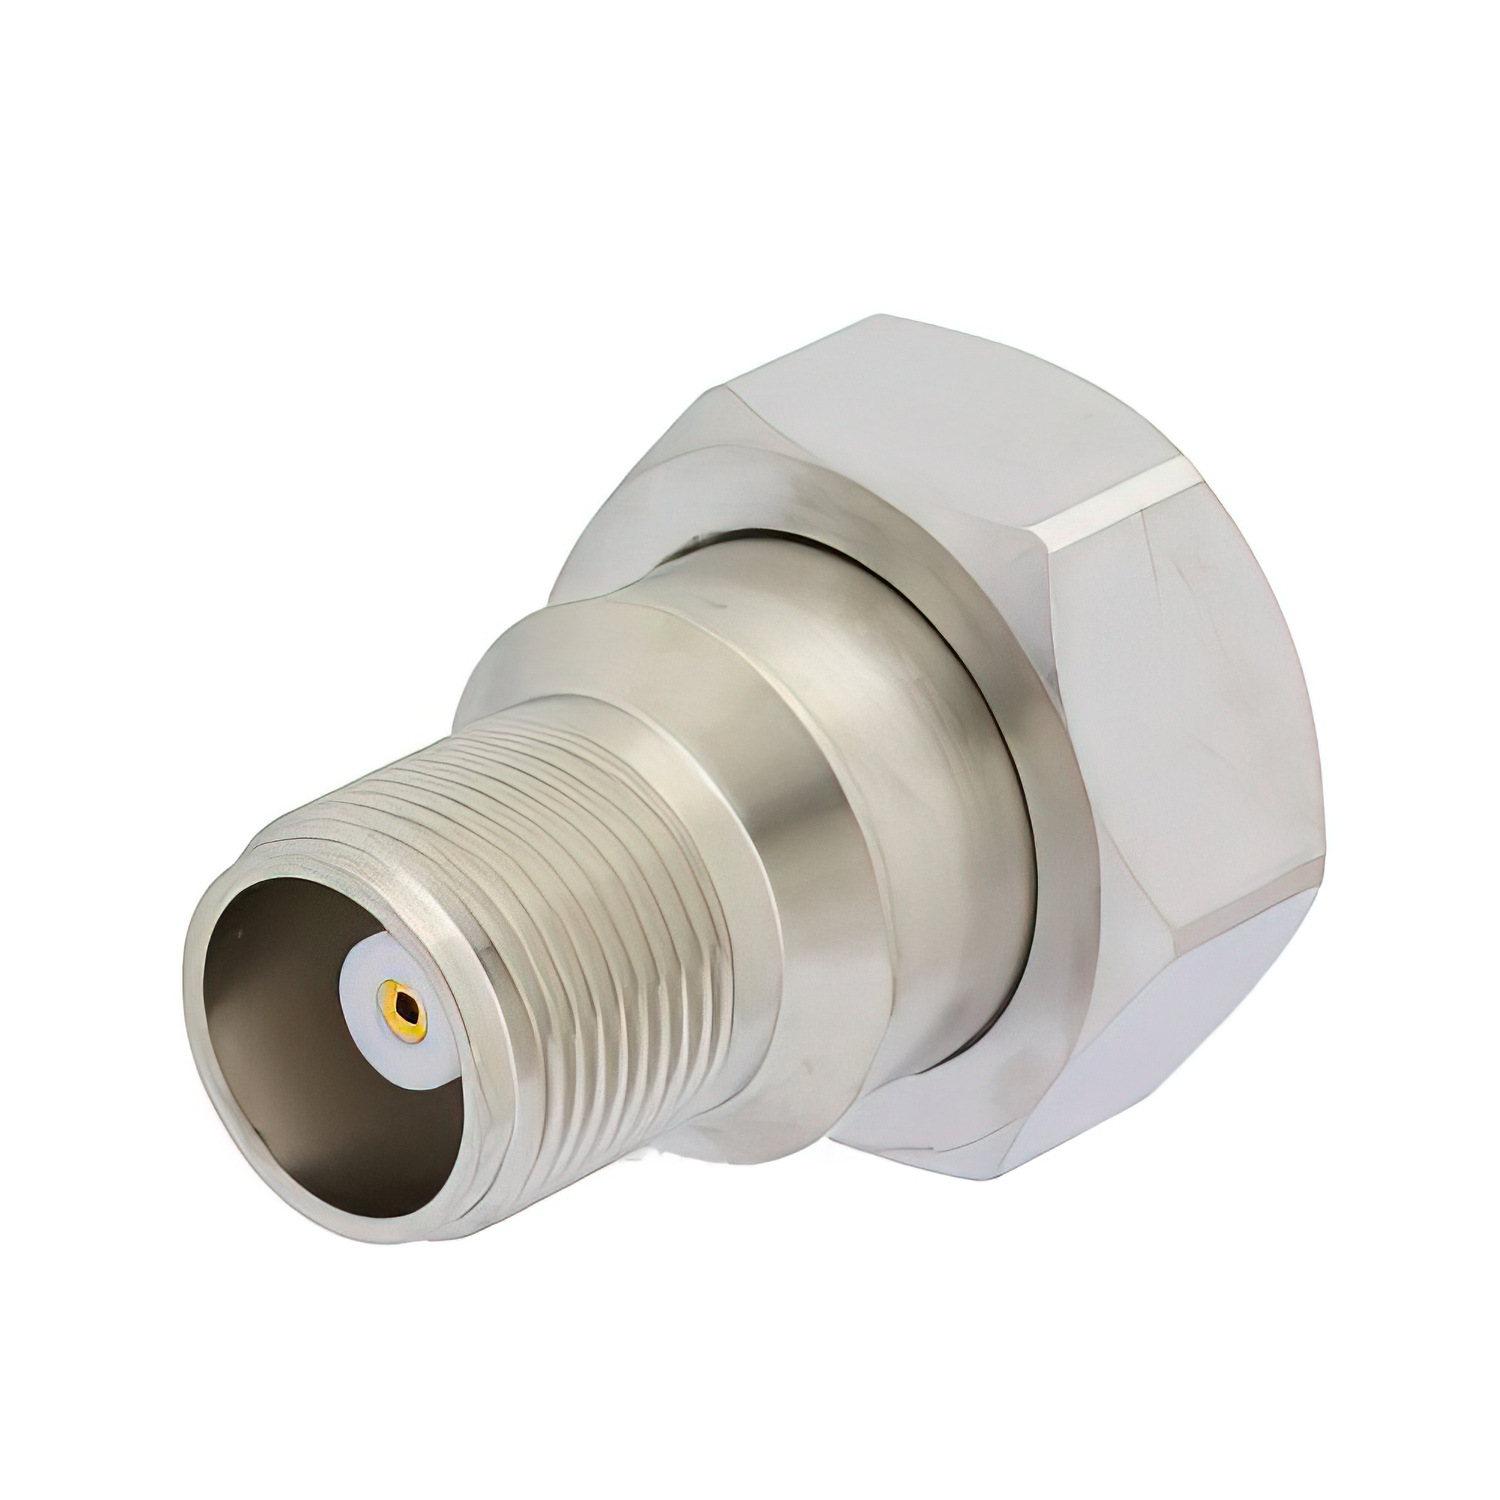 7-16 DIN Male to HN Female Adapter 1